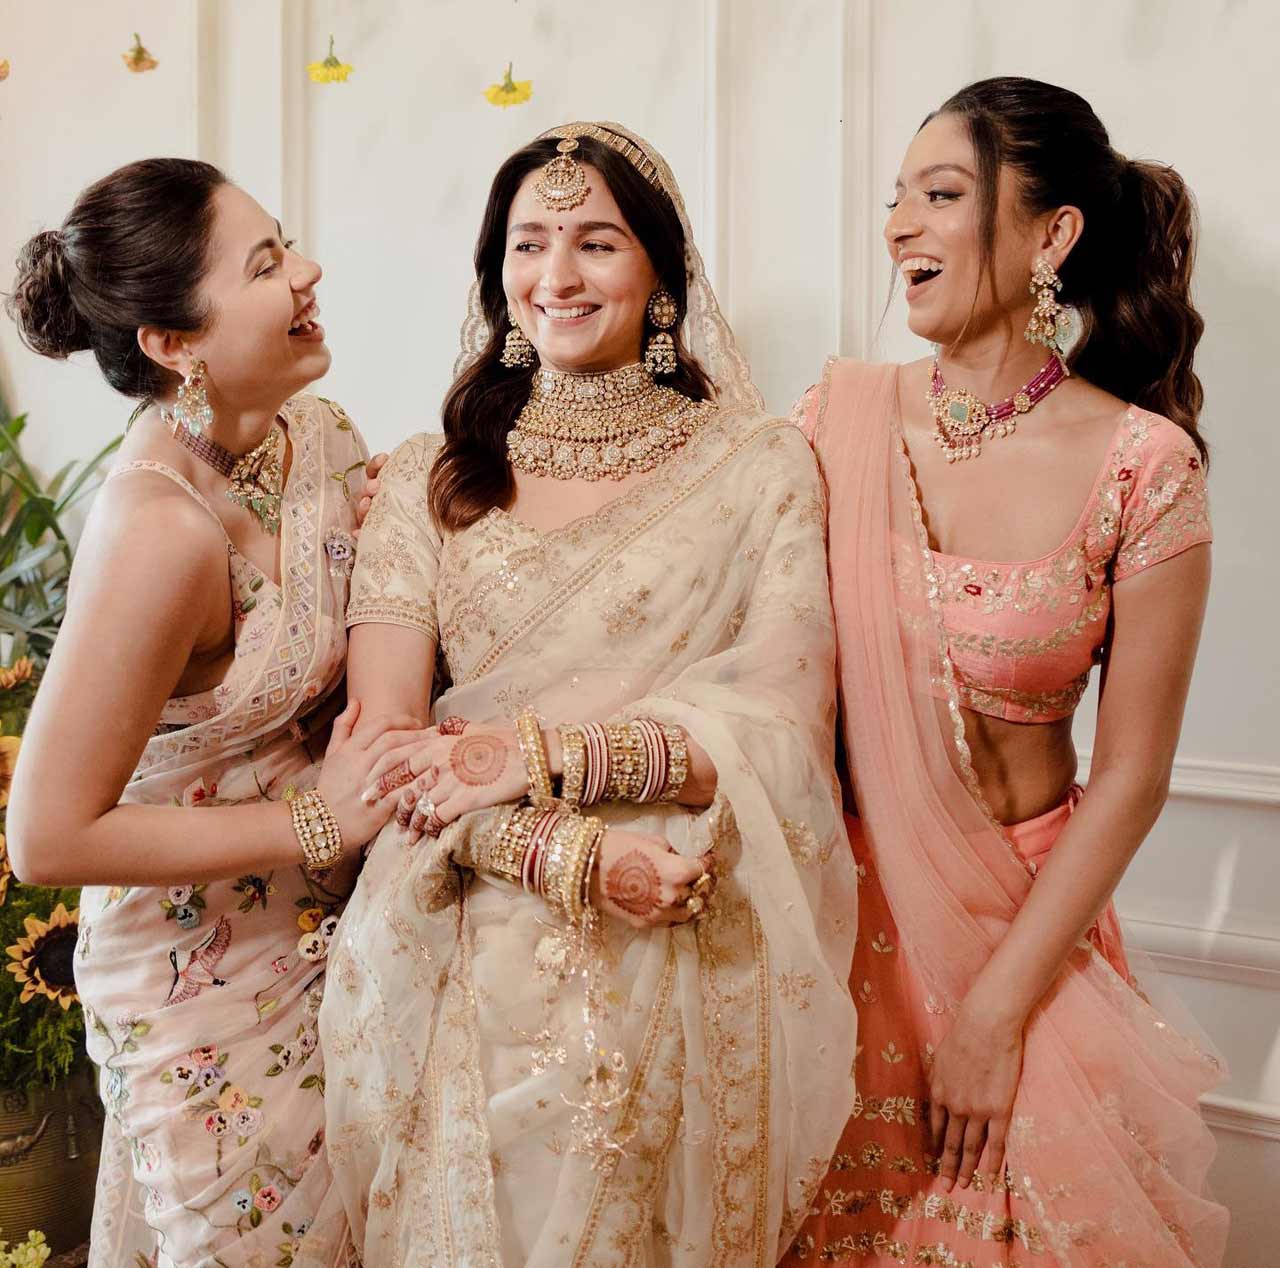 Alia Bhatt has turned bridesmaids to a lot of friends who tied the knot over the years. In picture: Anushka Ranjan and Alia Bhatt with Tanya Saha Gupta.